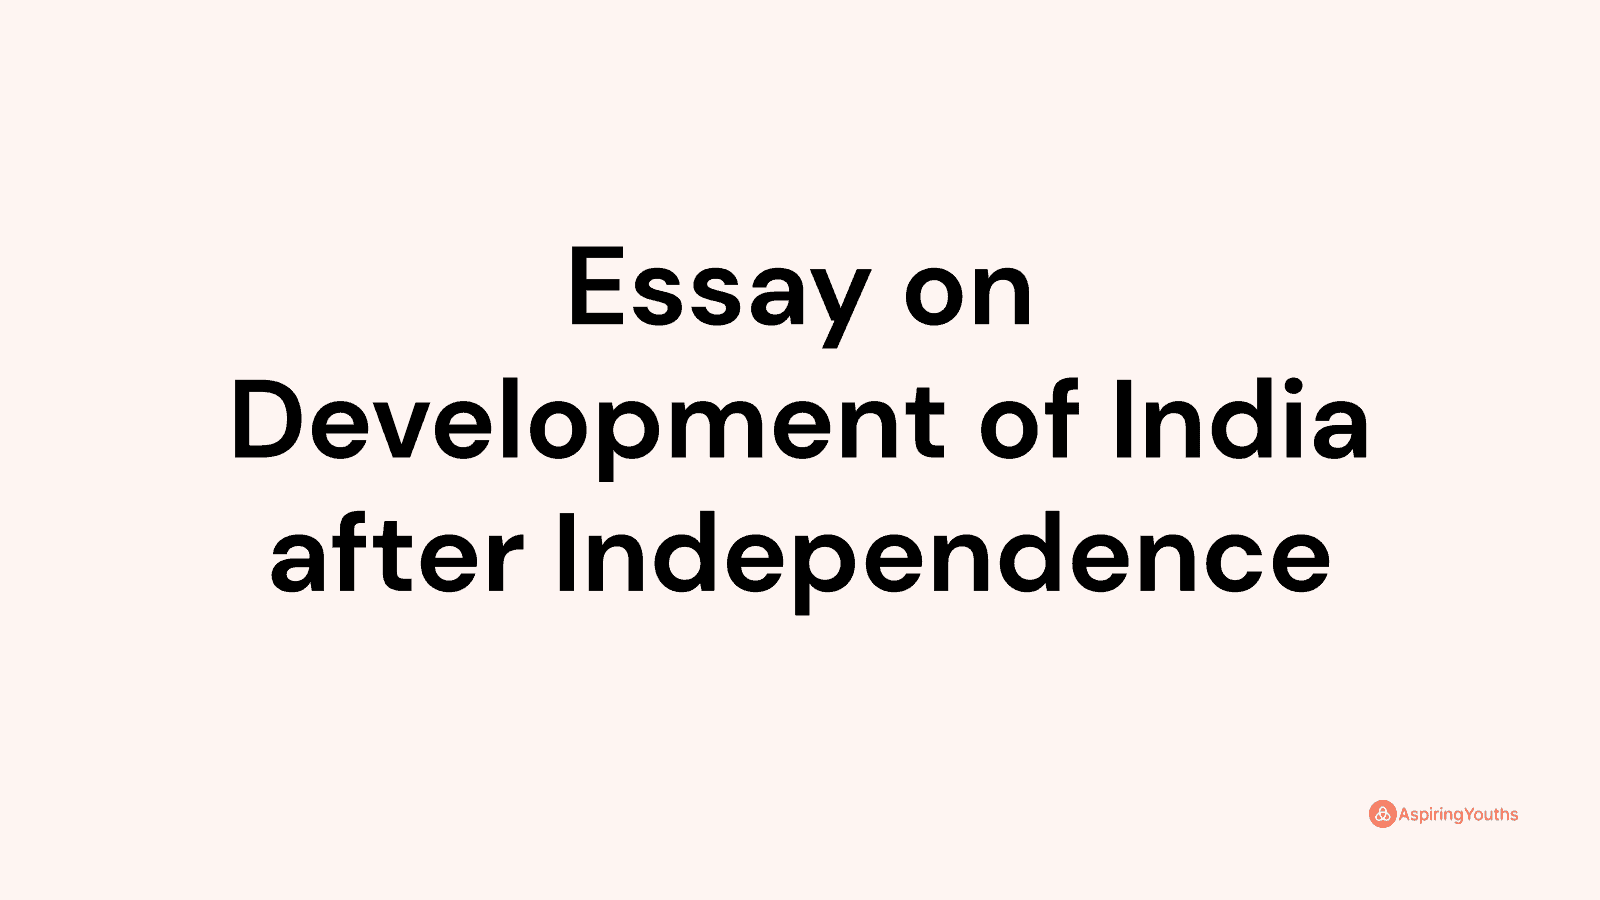 india's development after independence essay